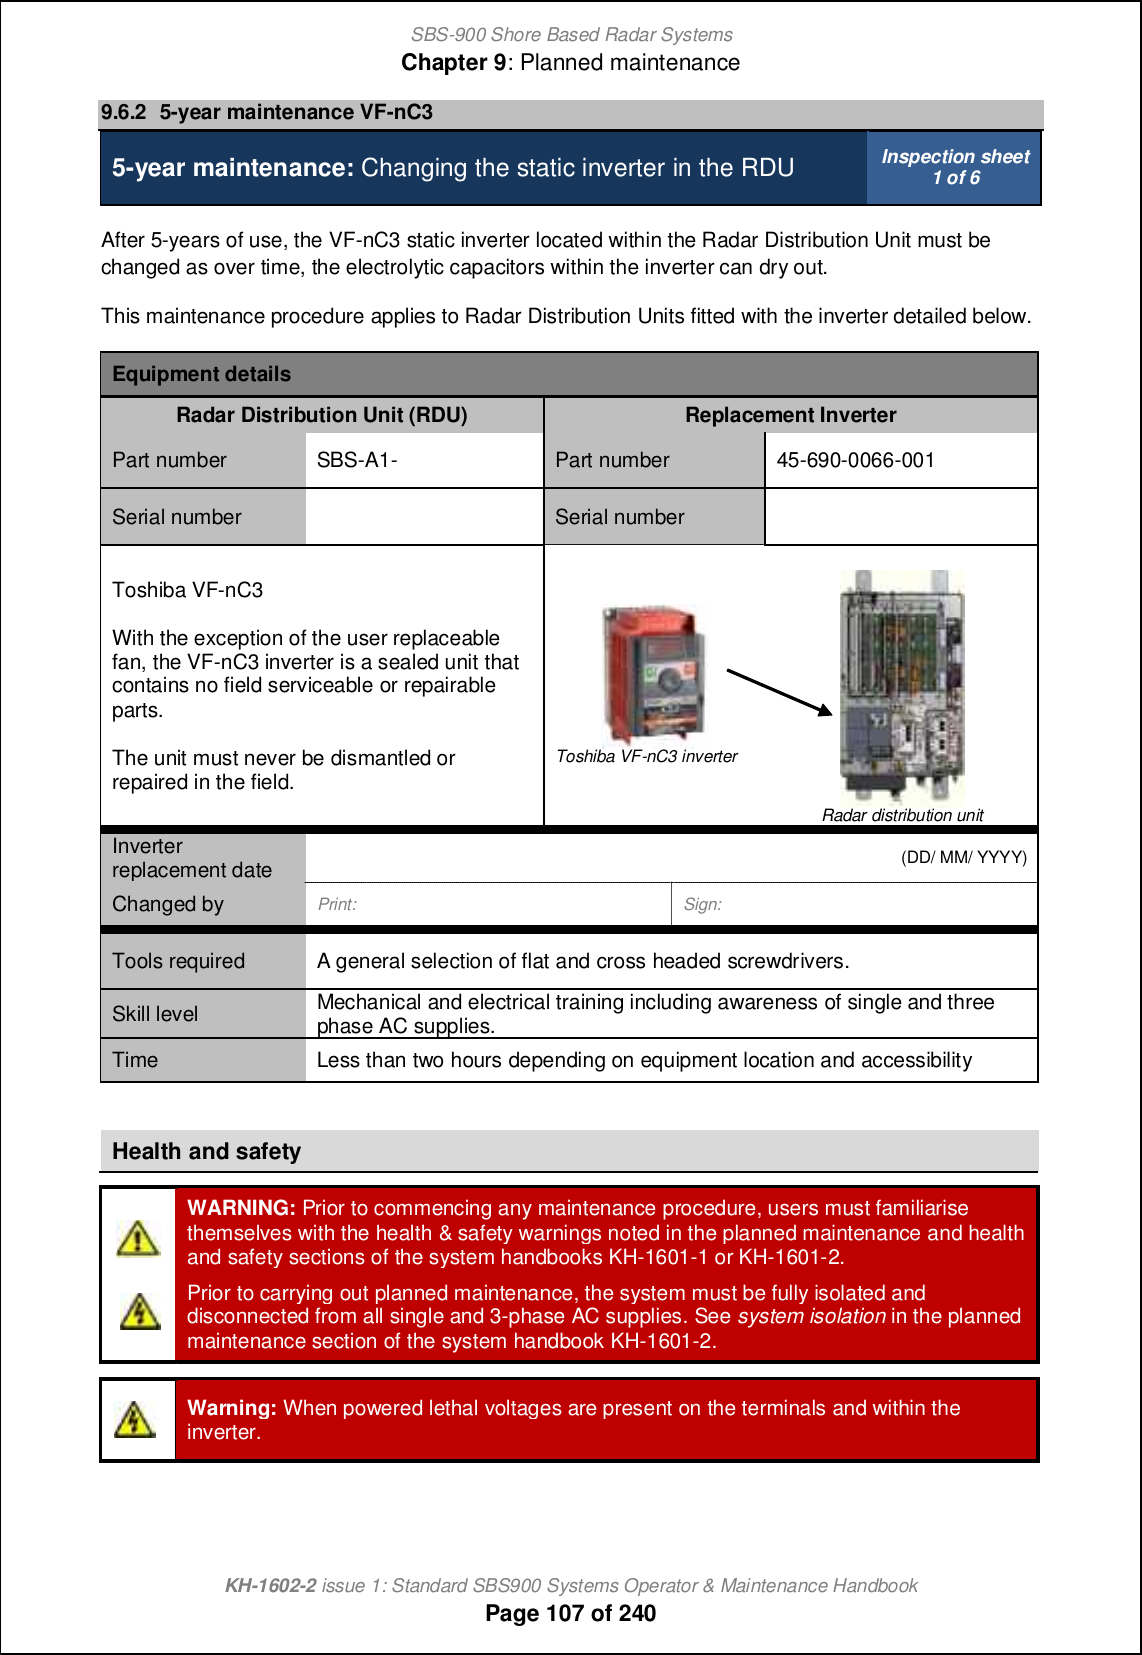 SBS-900 Shore Based Radar SystemsChapter 9: Planned maintenanceKH-1602-2 issue 1: Standard SBS900 Systems Operator &amp; Maintenance HandbookPage 107 of 2409.6.2 5-year maintenance VF-nC35-year maintenance: Changing the static inverter in the RDU Inspection sheet1 of 6After 5-years of use, the VF-nC3 static inverter located within the Radar Distribution Unit must bechanged as over time, the electrolytic capacitors within the inverter can dry out.This maintenance procedure applies to Radar Distribution Units fitted with the inverter detailed below.Equipment detailsRadar Distribution Unit (RDU) Replacement InverterPart number SBS-A1- Part number 45-690-0066-001Serial number Serial numberToshiba VF-nC3With the exception of the user replaceablefan, the VF-nC3 inverter is a sealed unit thatcontains no field serviceable or repairableparts.The unit must never be dismantled orrepaired in the field.Toshiba VF-nC3 inverterRadar distribution unitInverterreplacement date(DD/ MM/ YYYY)Changed by Print: Sign:Tools required A general selection of flat and cross headed screwdrivers.Skill level Mechanical and electrical training including awareness of single and threephase AC supplies.Time Less than two hours depending on equipment location and accessibilityHealth and safetyWARNING: Prior to commencing any maintenance procedure, users must familiarisethemselves with the health &amp; safety warnings noted in the planned maintenance and healthand safety sections of the system handbooks KH-1601-1 or KH-1601-2.Prior to carrying out planned maintenance, the system must be fully isolated anddisconnected from all single and 3-phase AC supplies. See system isolation in the plannedmaintenance section of the system handbook KH-1601-2.Warning: When powered lethal voltages are present on the terminals and within theinverter.